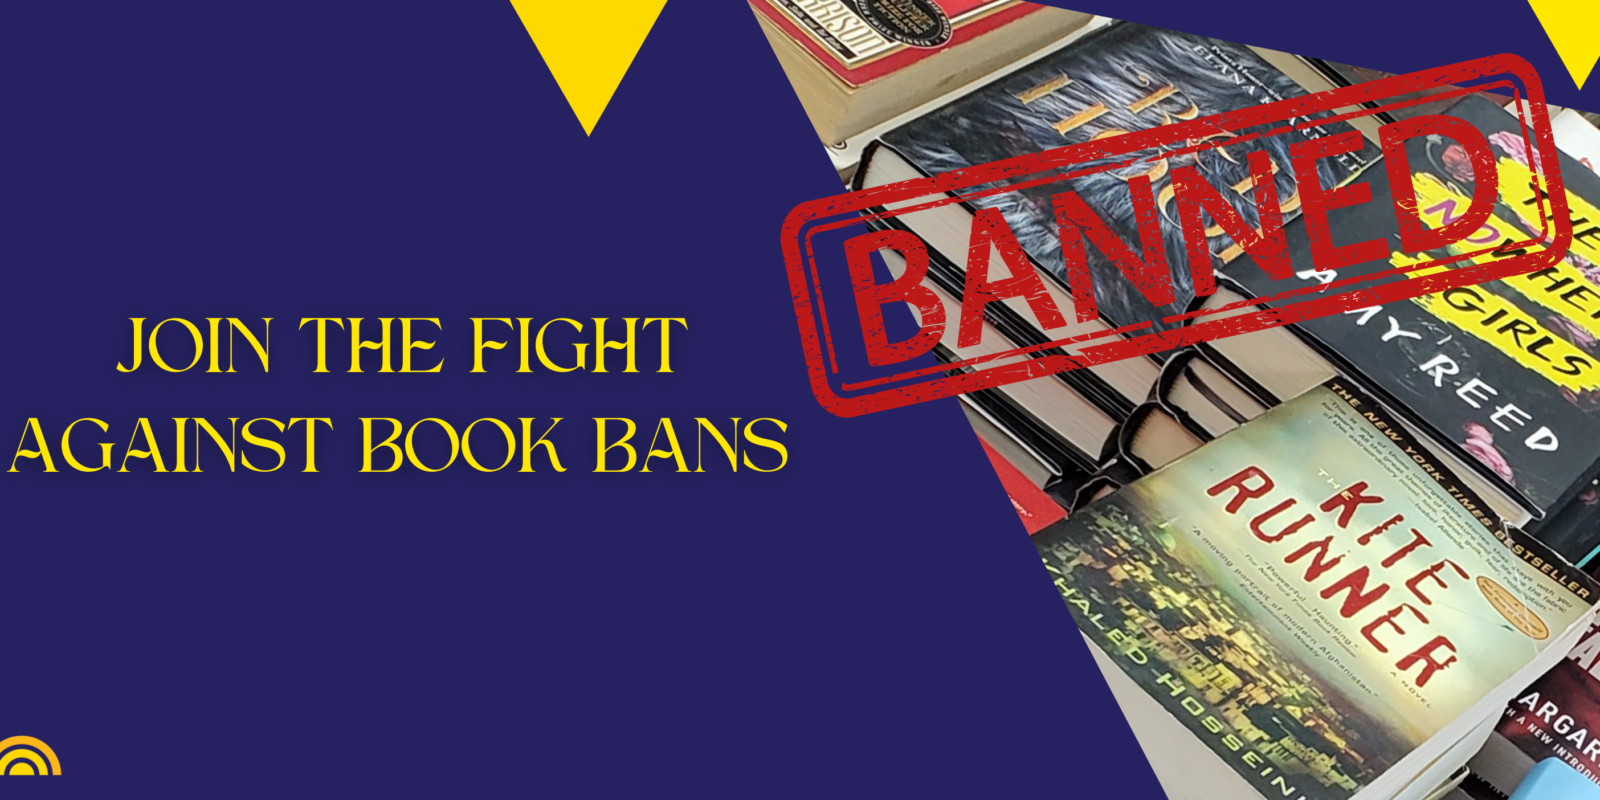 FAF Releases “Banned Books: A Florida Citizen’s Guide to Legal Rights and Pushback”